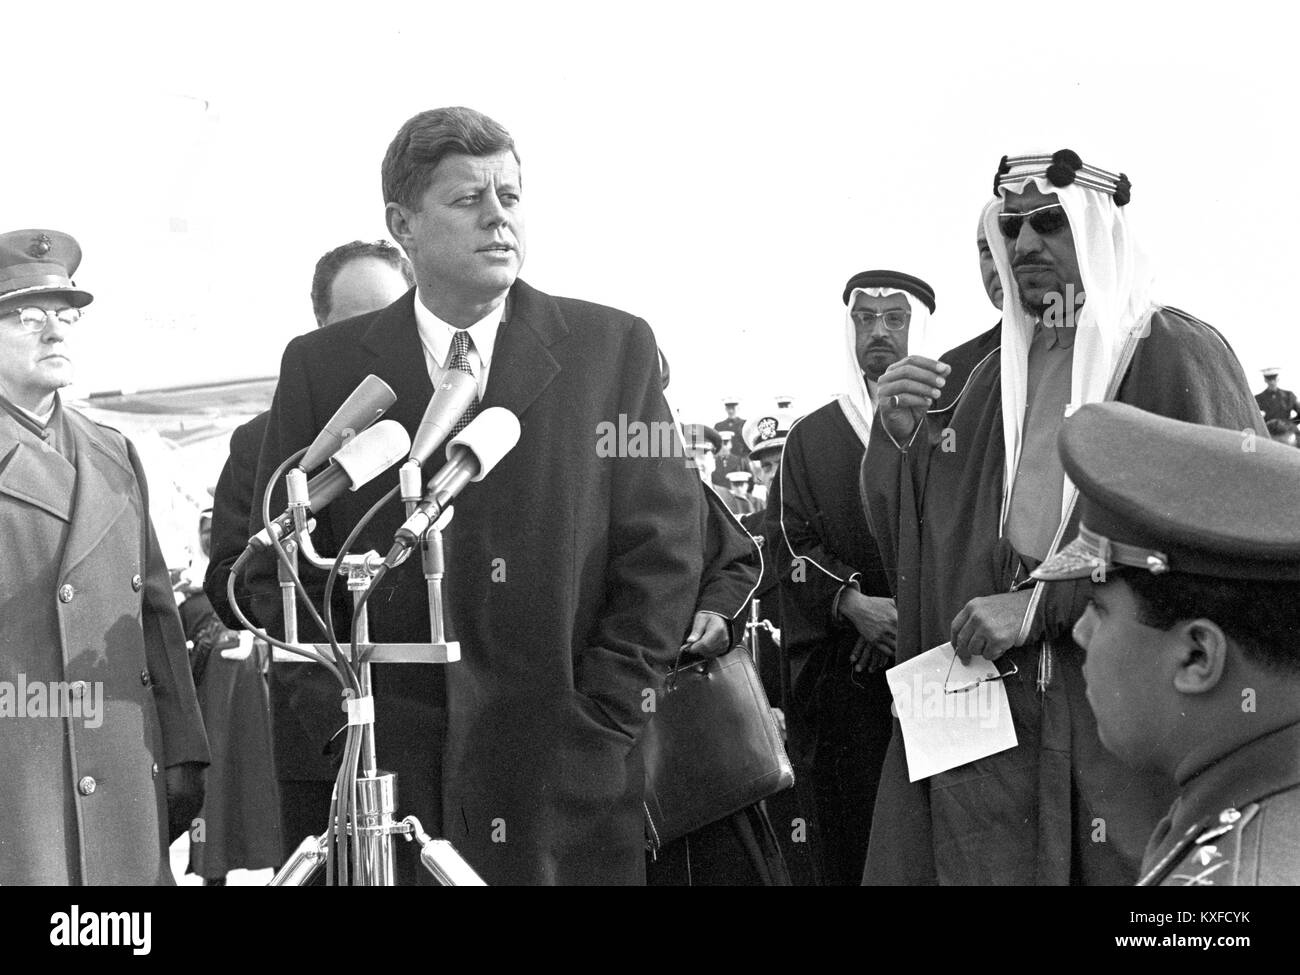 United States President John F. Kennedy welcomes a delegation led by King Saud bin Abdulaziz Al Saud of Saudi Arabia during a ceremony at Andrews Air Force Base, Maryland on February 13, 1962.  Credit: Arnie Sachs / CNP /MediaPunch Stock Photo